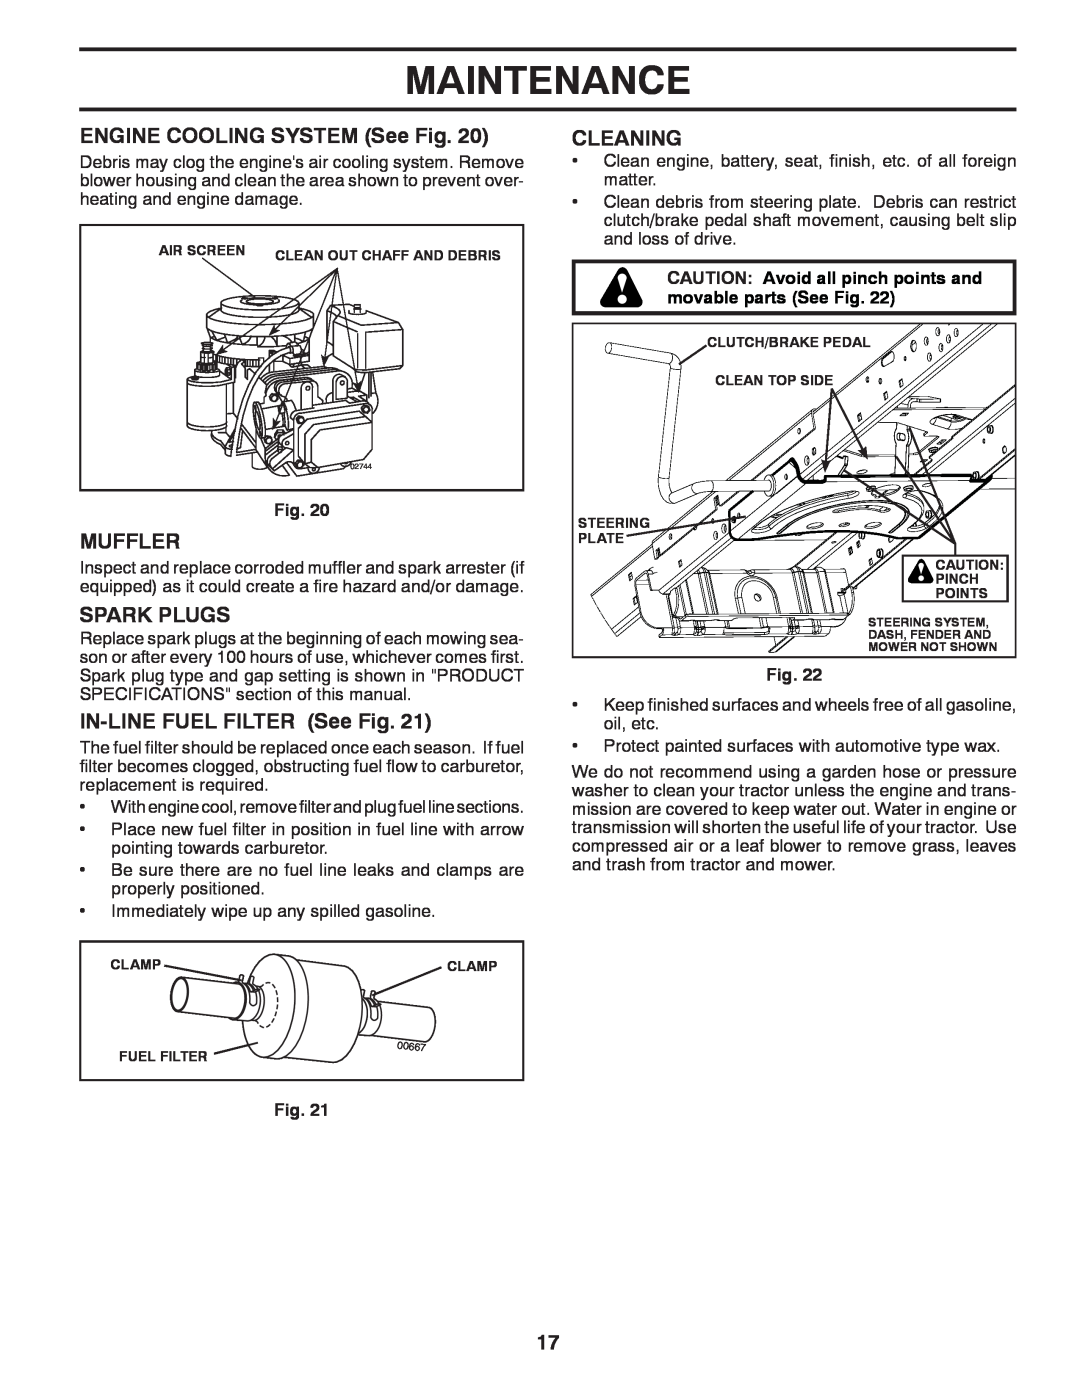 Poulan 96042010700 Maintenance, ENGINE COOLING SYSTEM See Fig, Muffler, Spark Plugs, IN-LINEFUEL FILTER See Fig, Cleaning 